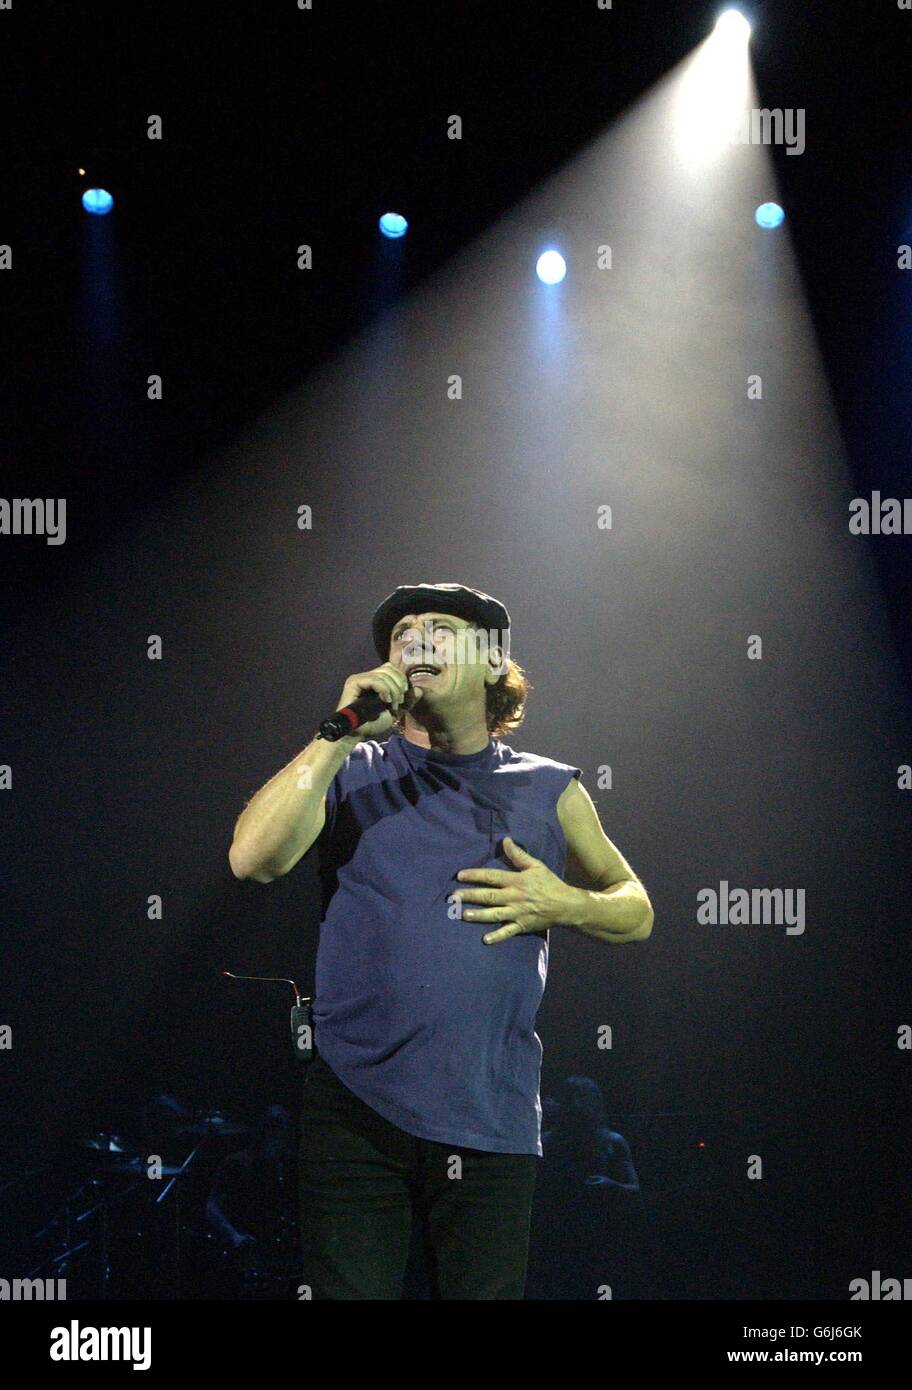 Australian heavymetal band AC/DC's lead singer Brian Johnson performs live in concert at the Carling Hammersmith Apollo in west London. Stock Photo